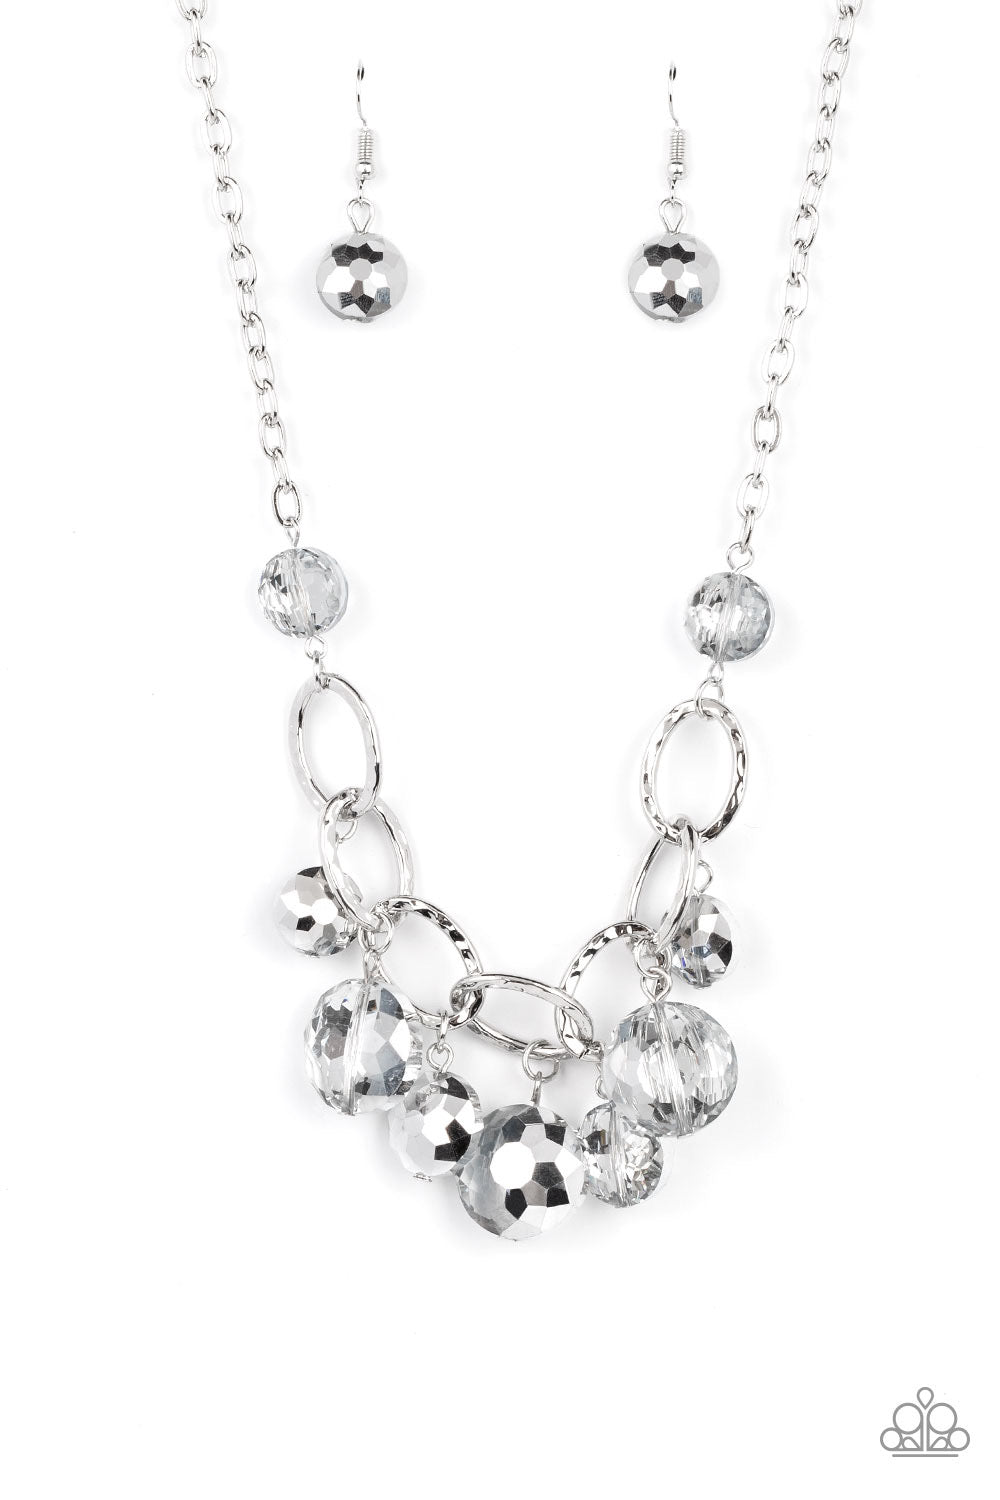 Paparazzi Rhinestone River - Silver Necklace - Bead Necklace Paparazzi Jewelry Images